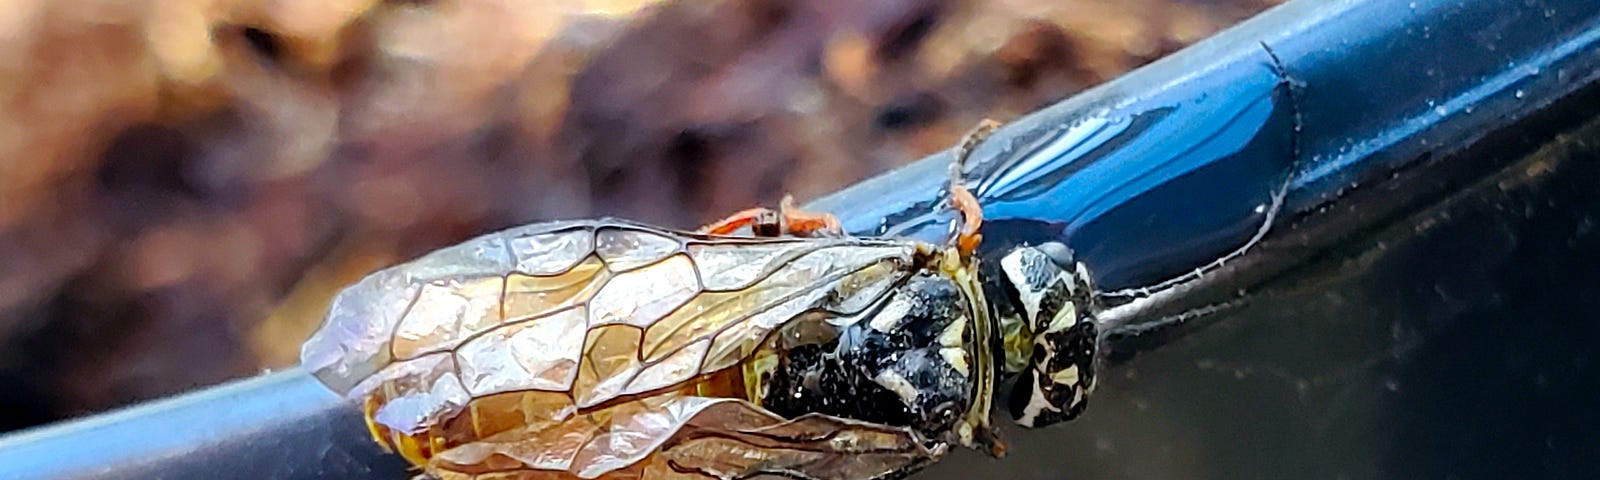 A close-up shows a winged insect attached to a dark surface with a water drop, with the background softly blurred. The insect appears translucent and fragile with its right wings looking deformed.